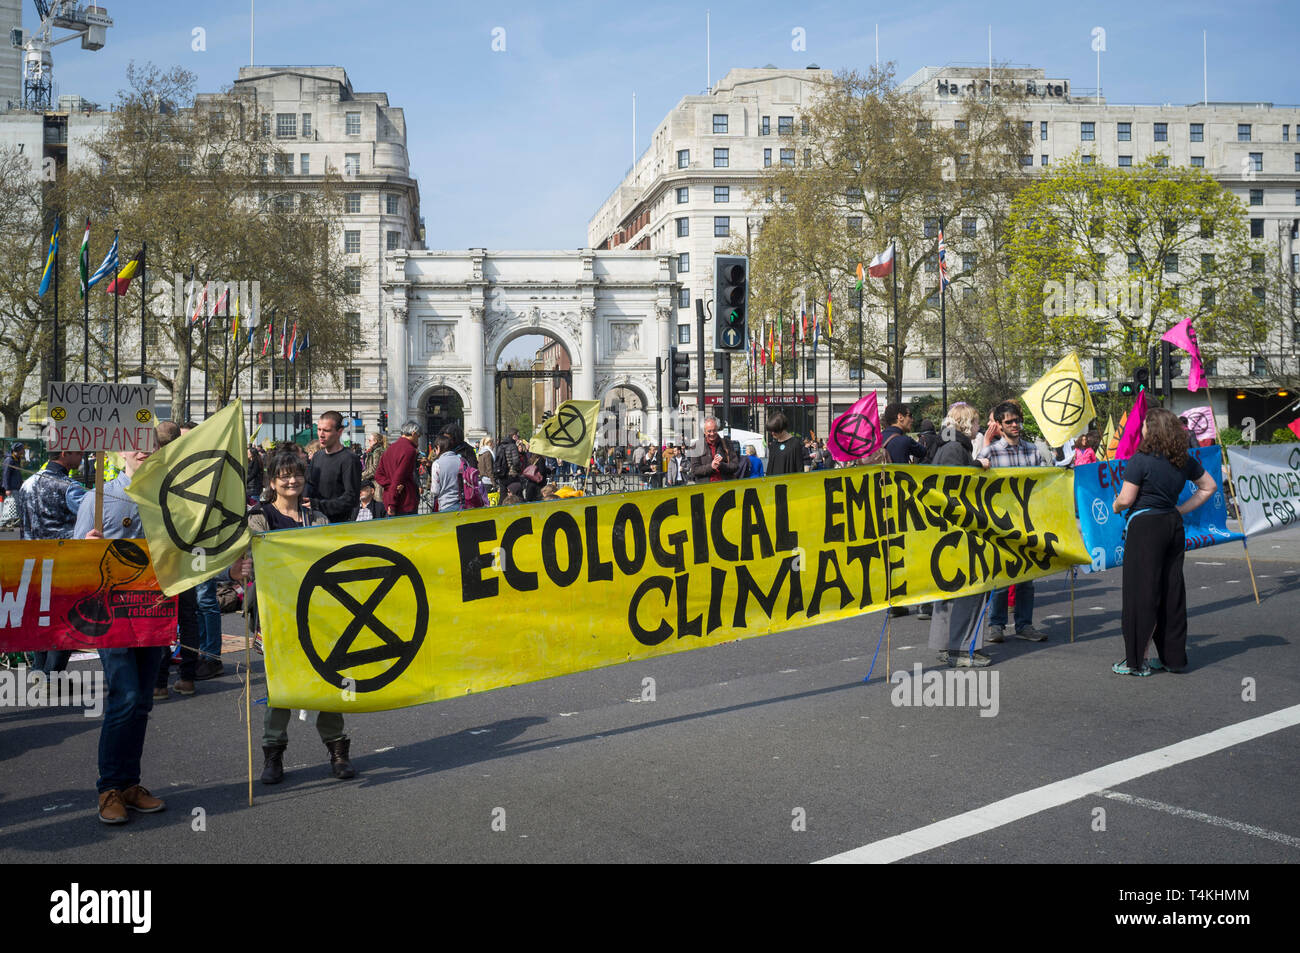 Demonstrators block the road with a banner reading 'Ecological Emergency Climate Crisis' at the Extinction Rebellion demonstration at Marble Arch Stock Photo